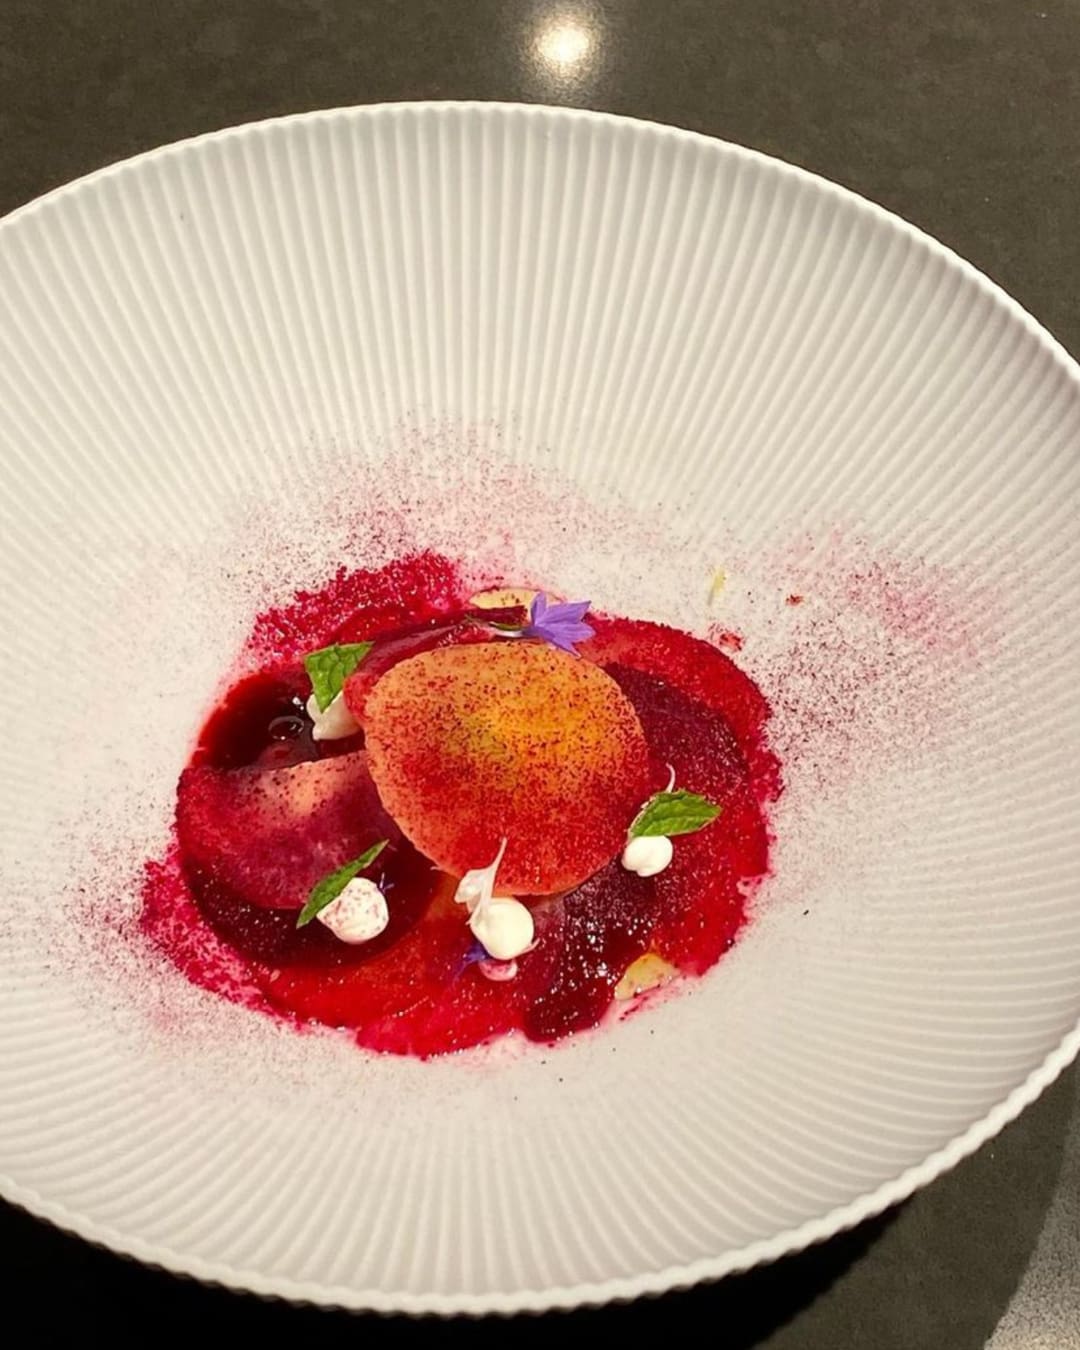 The best restaurants in Greenpoint NYC | Roasted beets with navel orange jelly and horseradish cream at restaurant Yuu